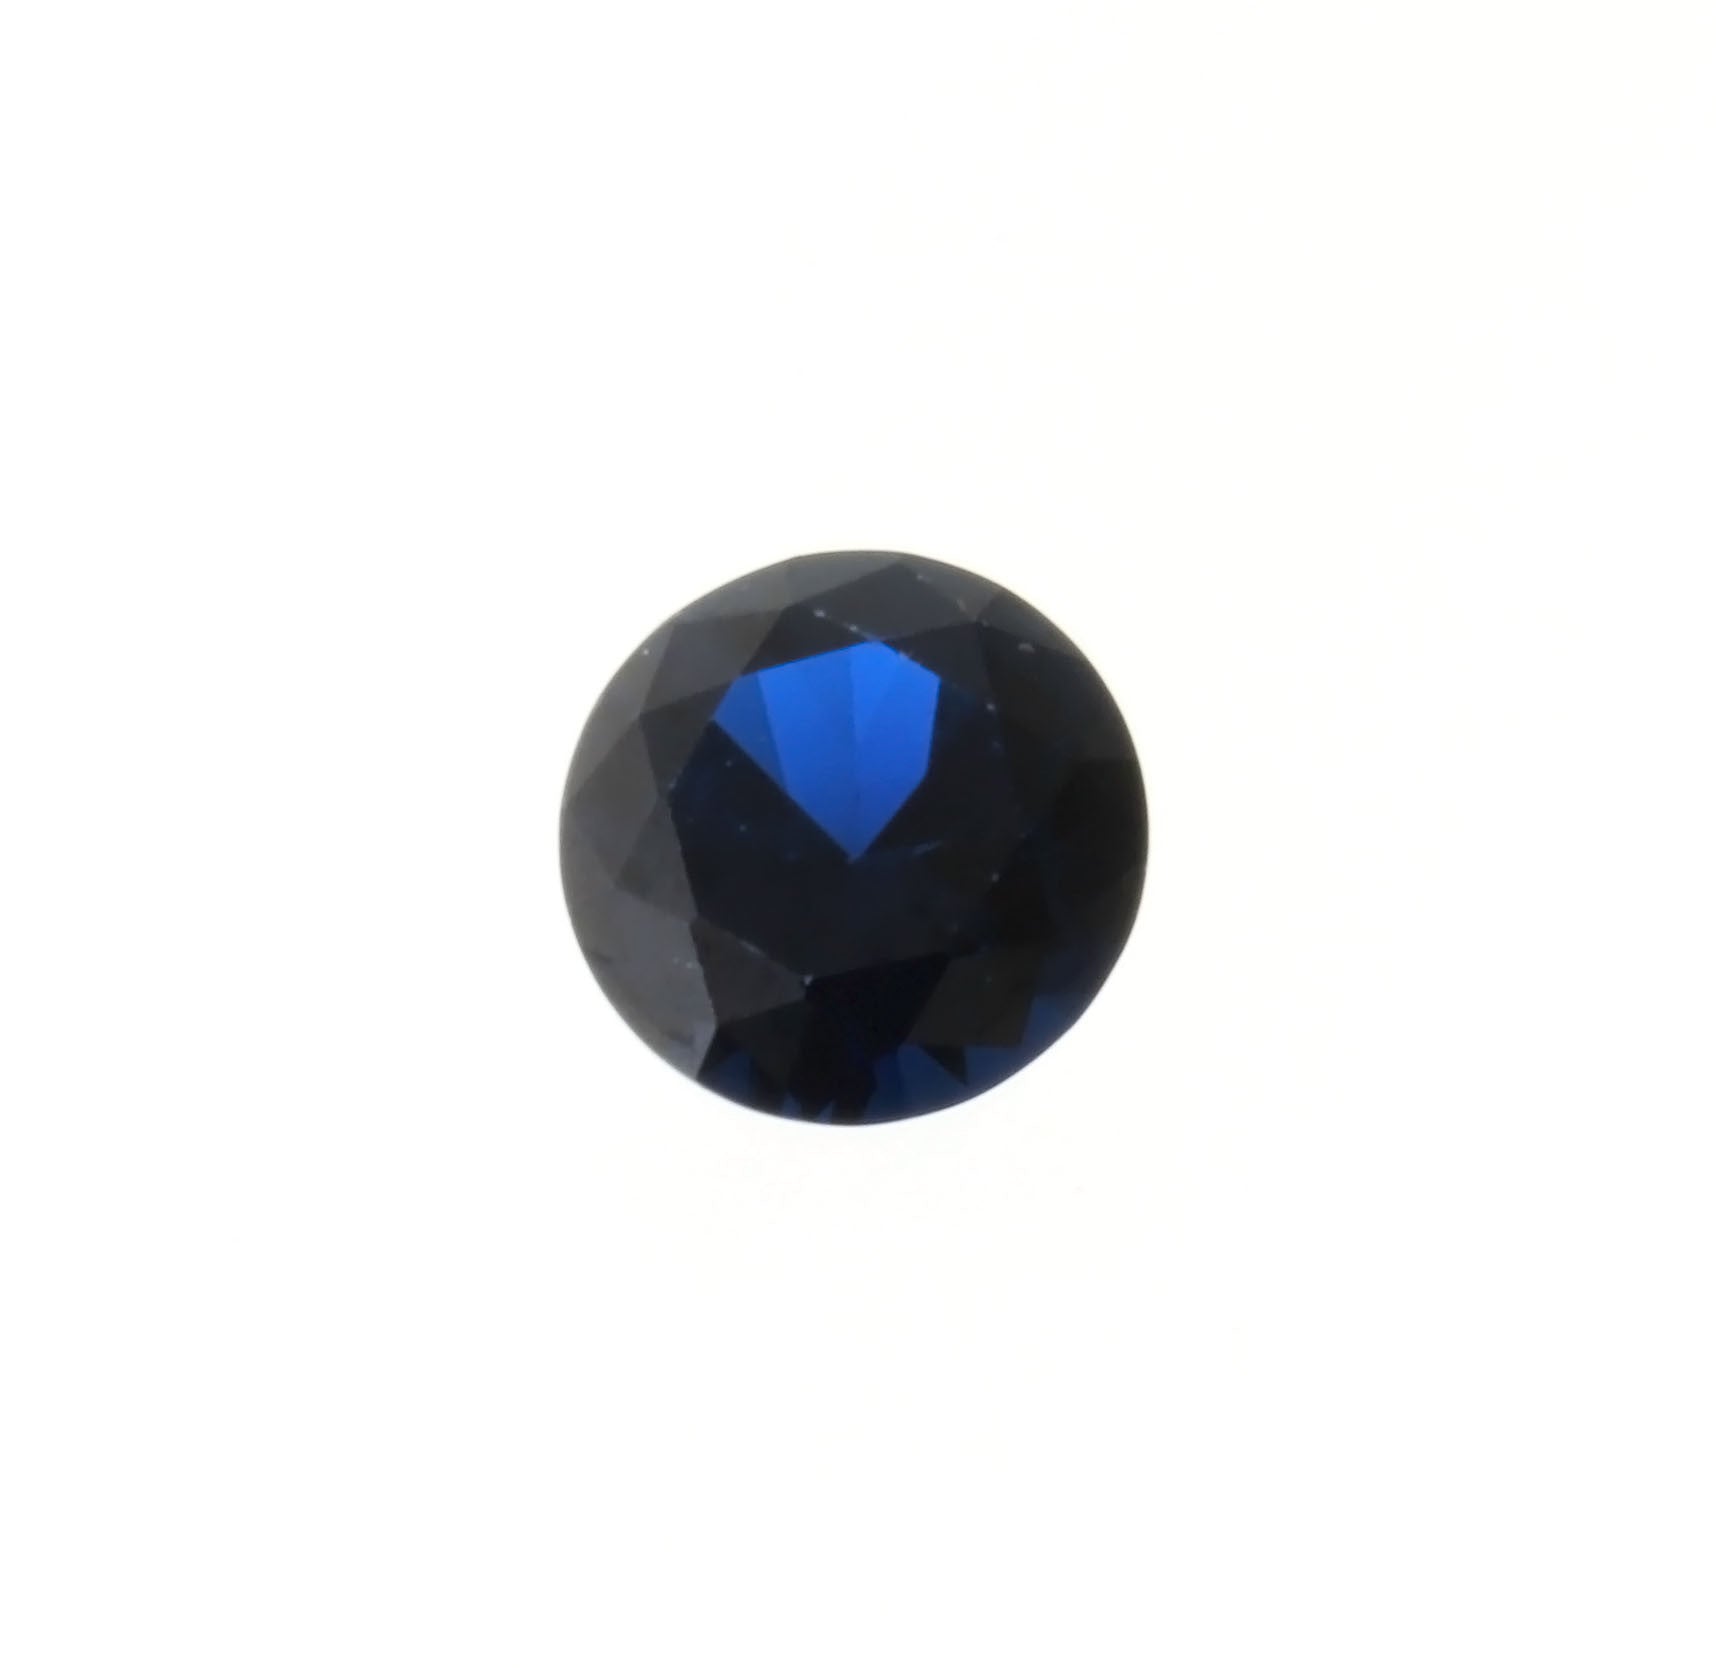 LAB GROWN SIMULATED SPINEL BLUE ROUND GIANT FACETED GEMS